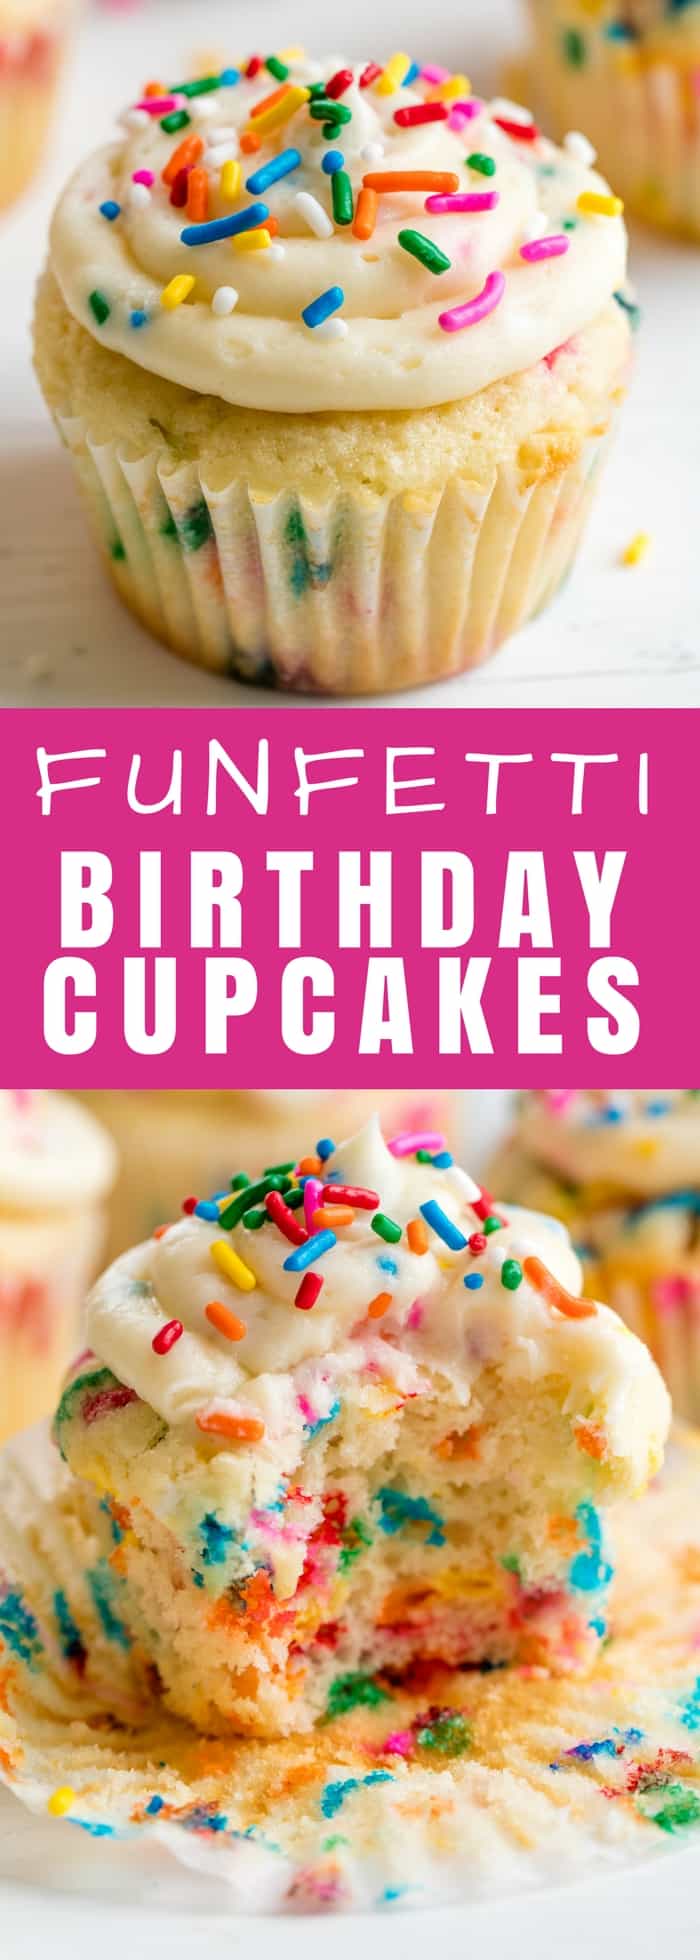 These Funfetti Birthday Cupcakes are perfect for any birthday party! Simple to make, no boxed mixes required, and perfectly moist and fluffy.